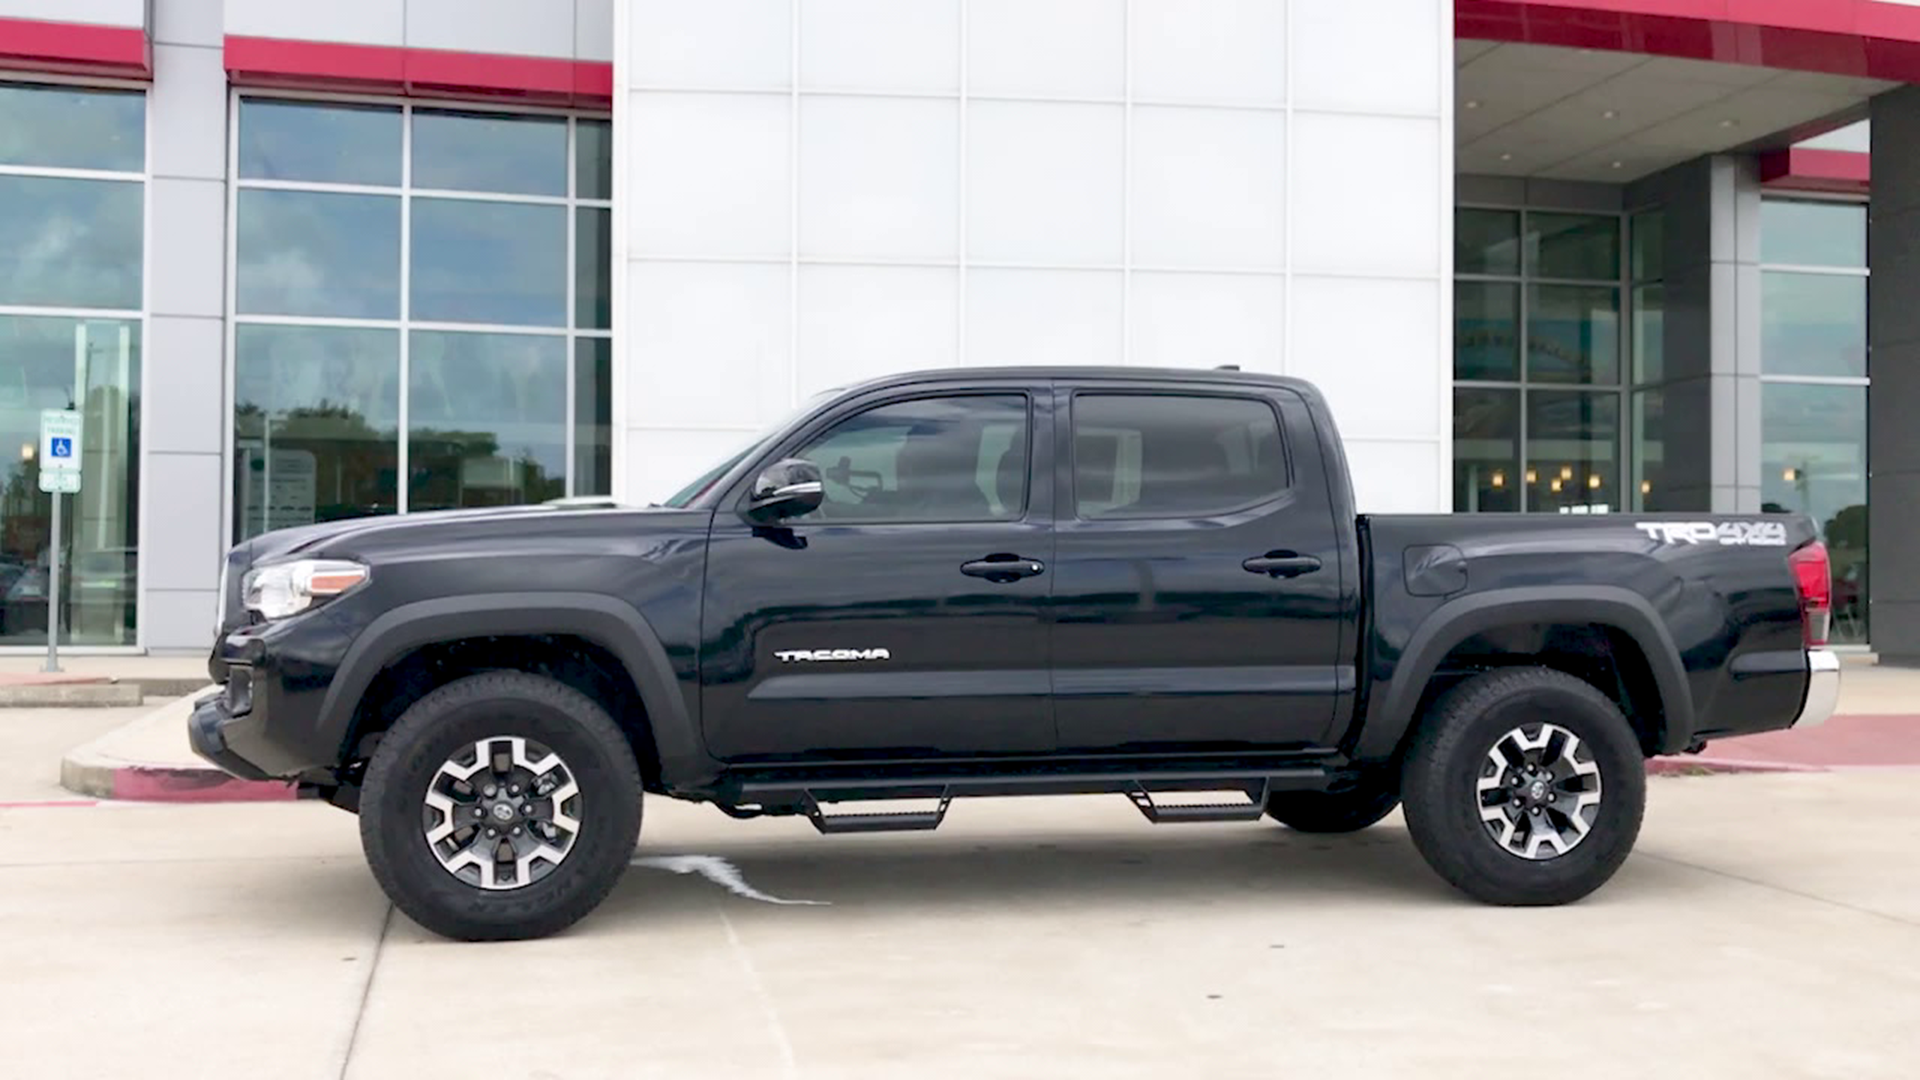 Today we're taking a 12News Test Drive in a 2019 Toyota Tacoma TRD Off Road from Philpott Toyota in Nederland. Call (409) 853-3800 or visit http://PhilpottToyota.com to get yours!